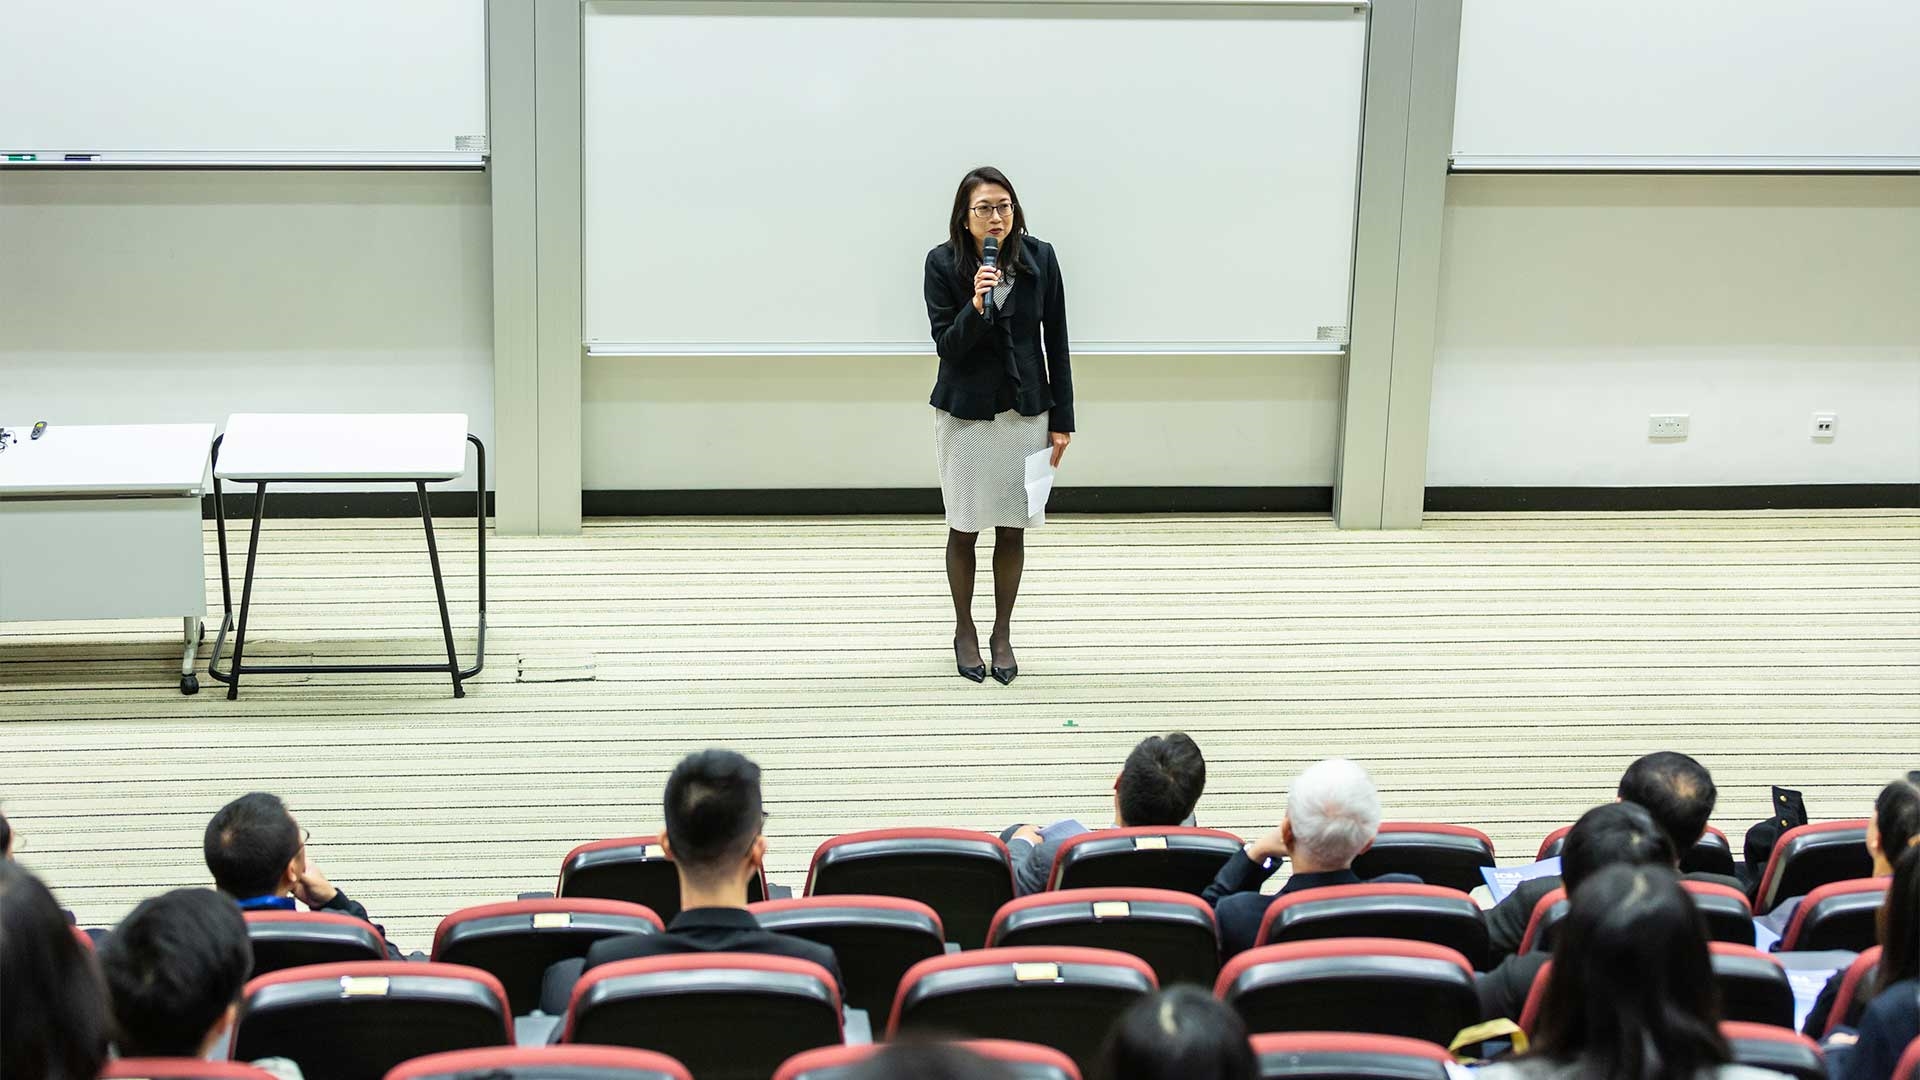 A staff member delivering a presentation to a lecture hall of students